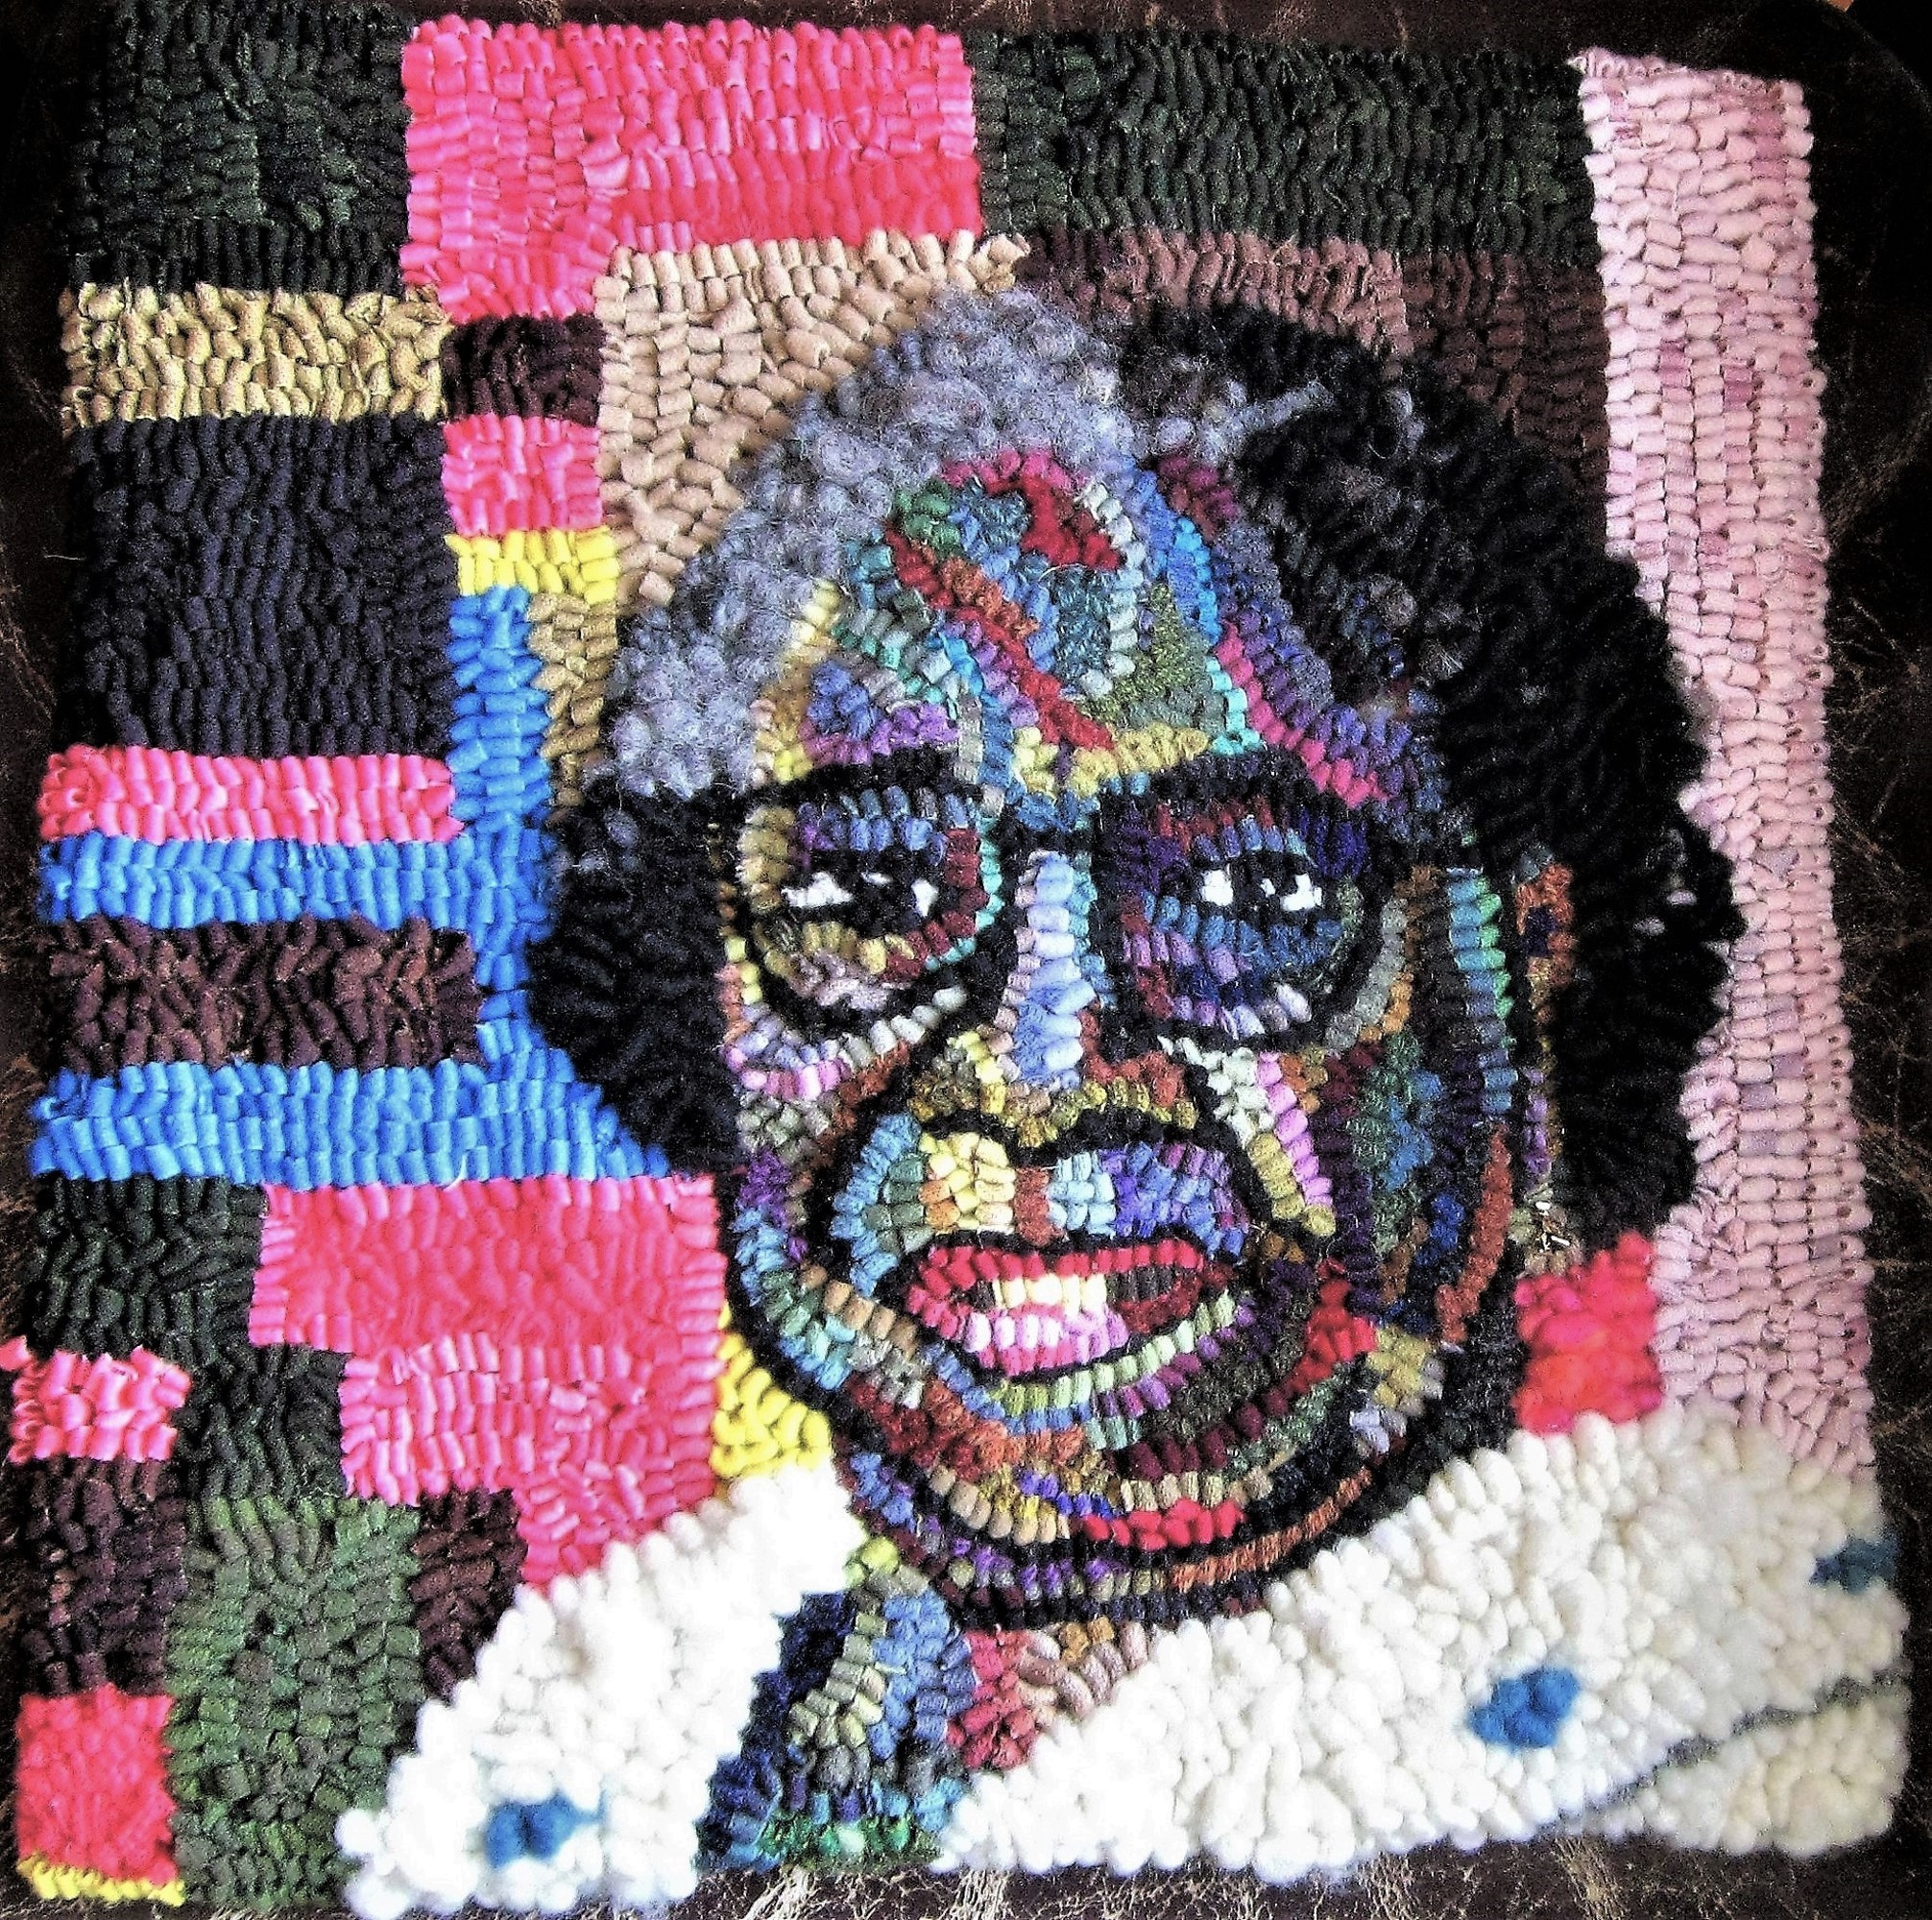 Mary Lee Bendolph, Gee's Bend Quilter 2